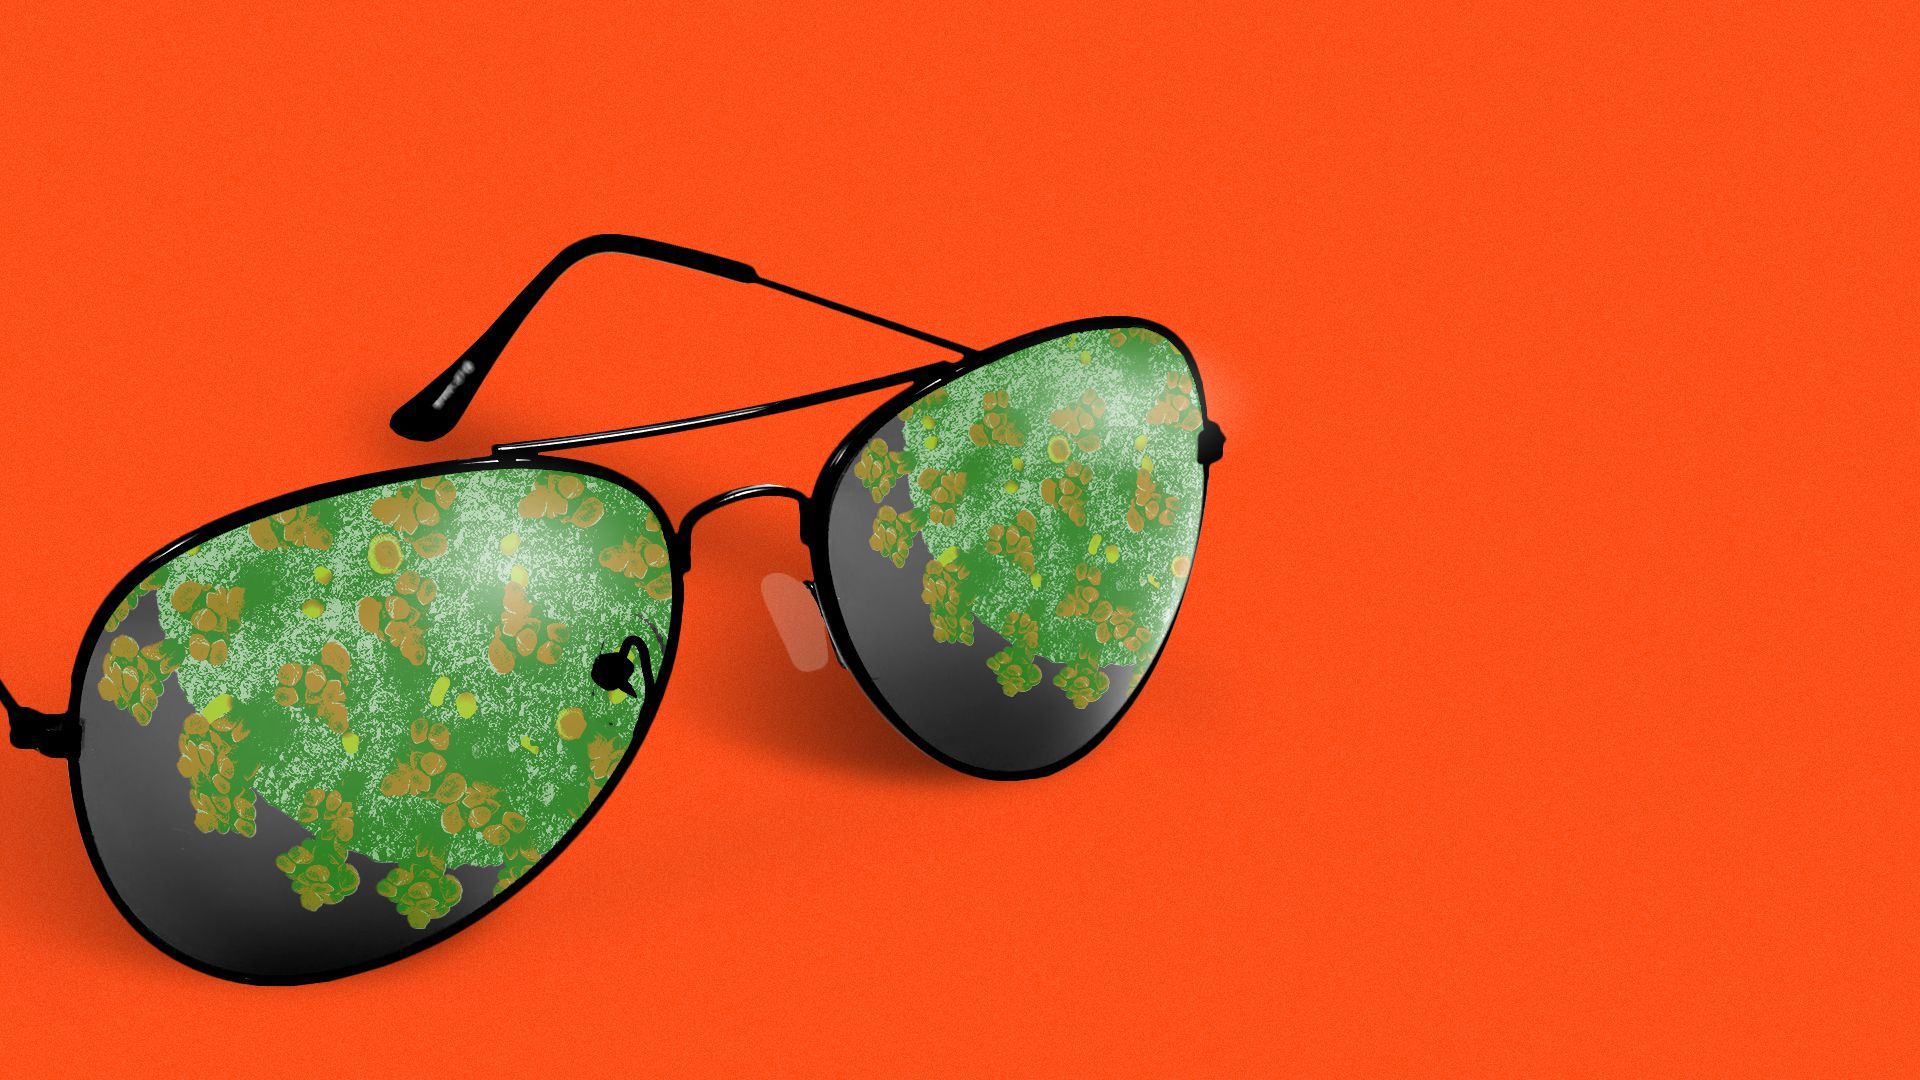 Illustration of aviator sunglasses with green COVID cells reflected in the lenses